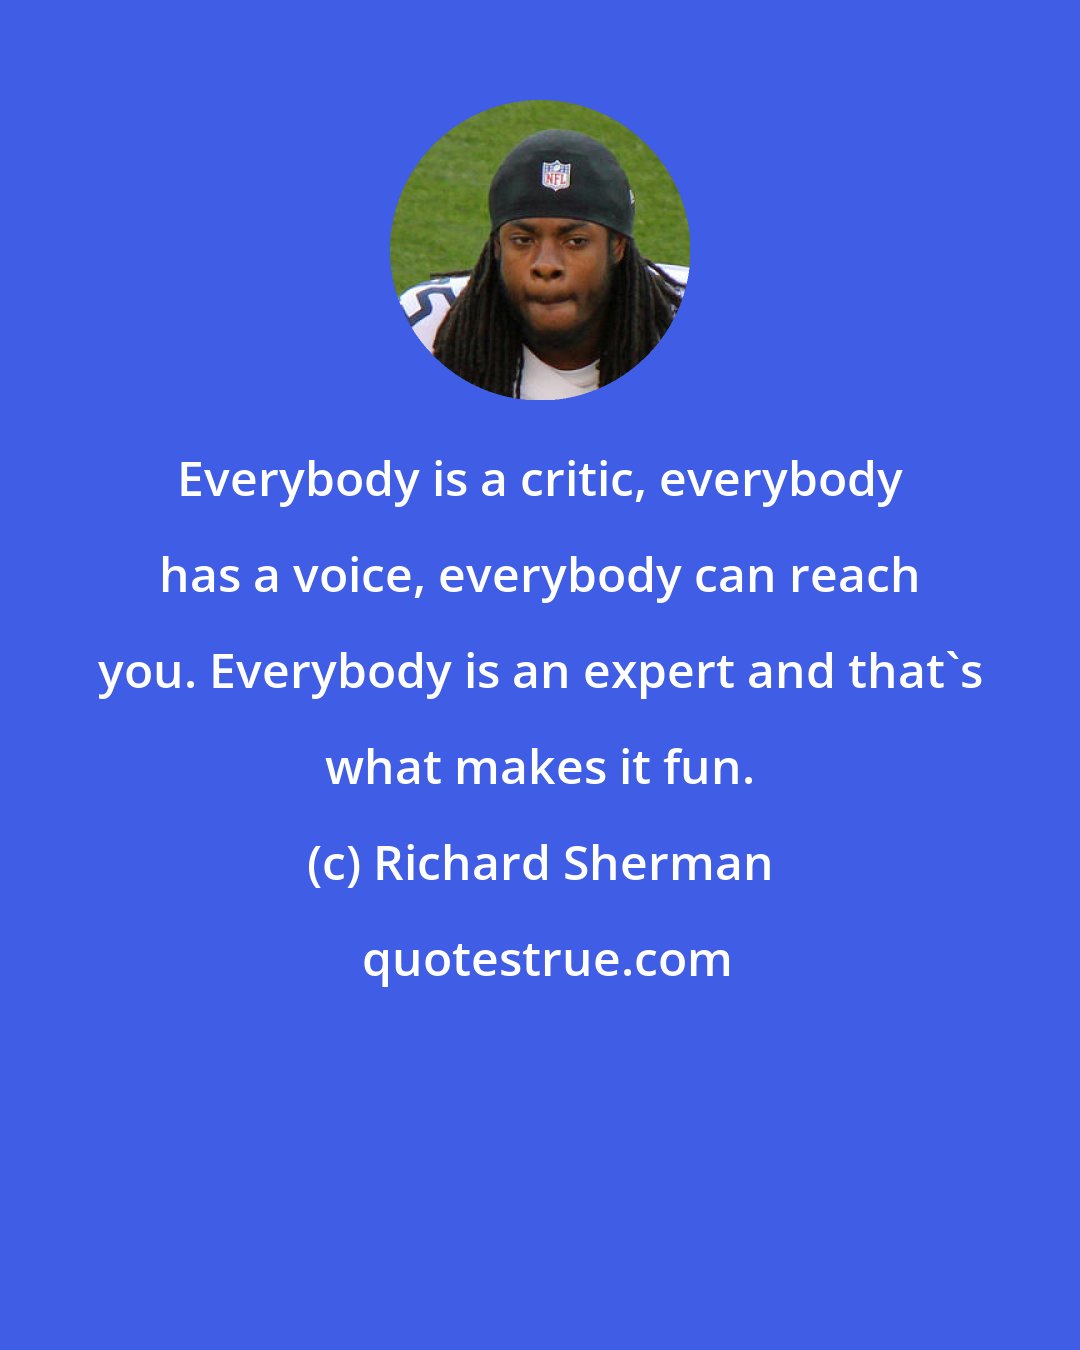 Richard Sherman: Everybody is a critic, everybody has a voice, everybody can reach you. Everybody is an expert and that's what makes it fun.